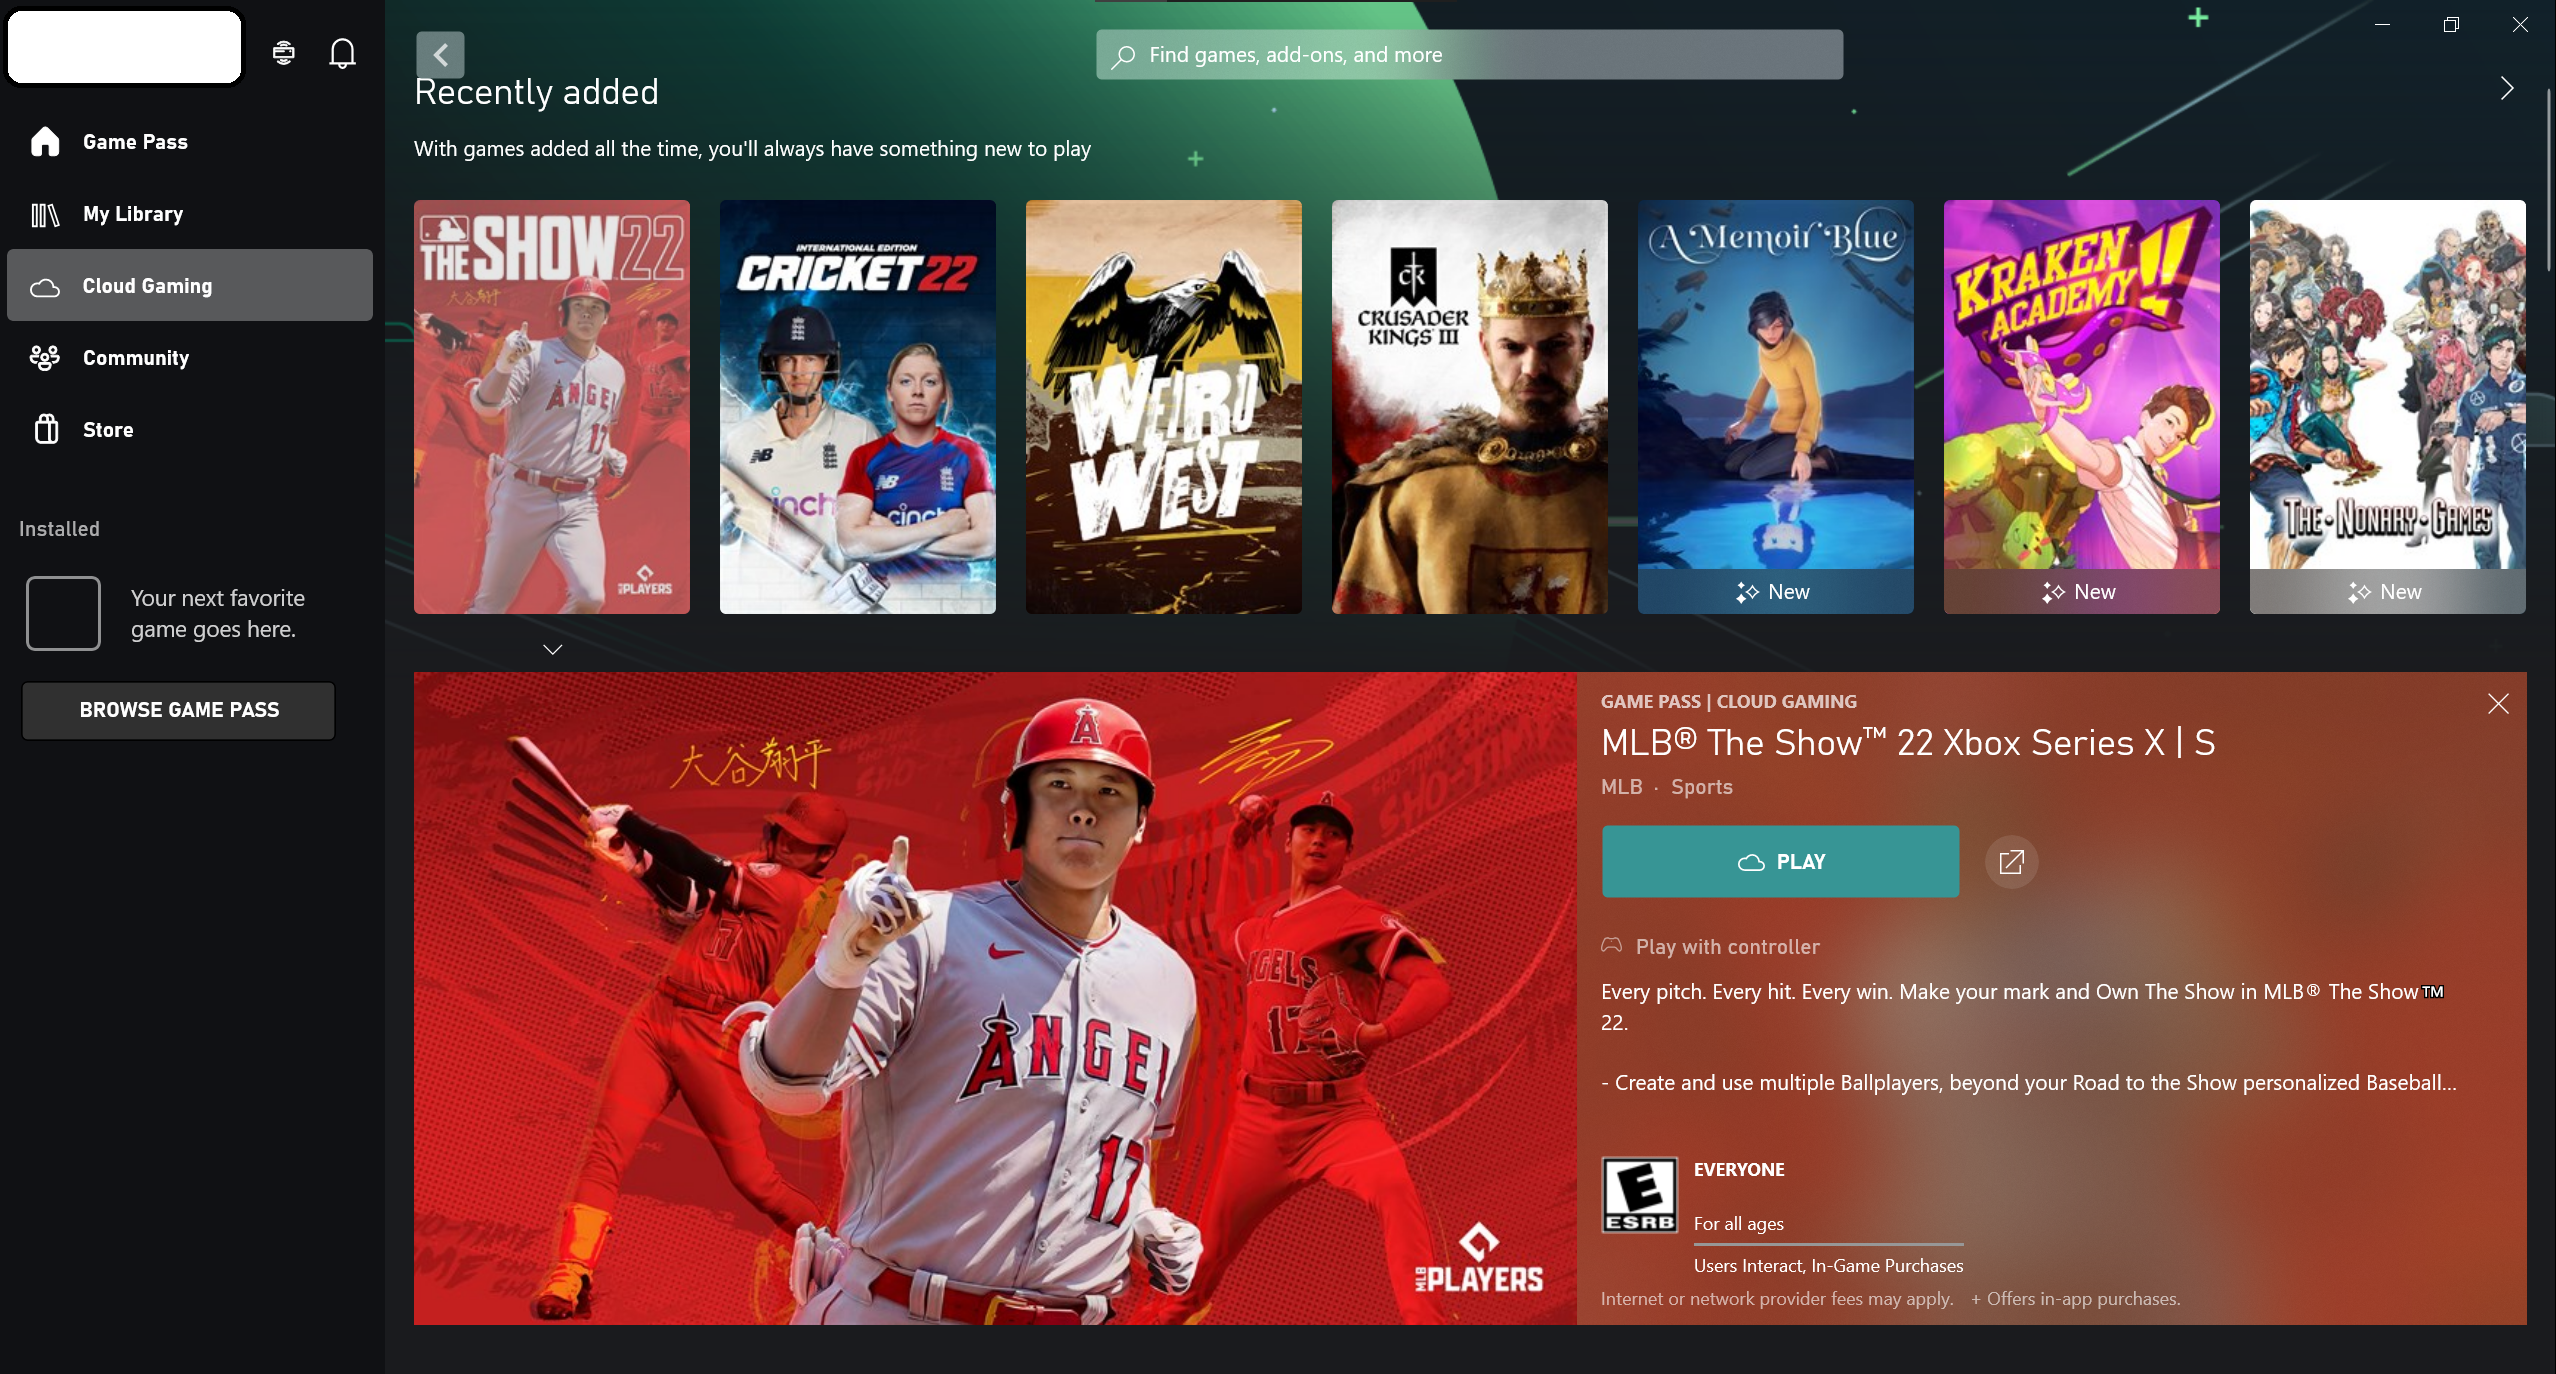 Xbox Game Pass April 2022 games include MLB: The Show 22 and Life